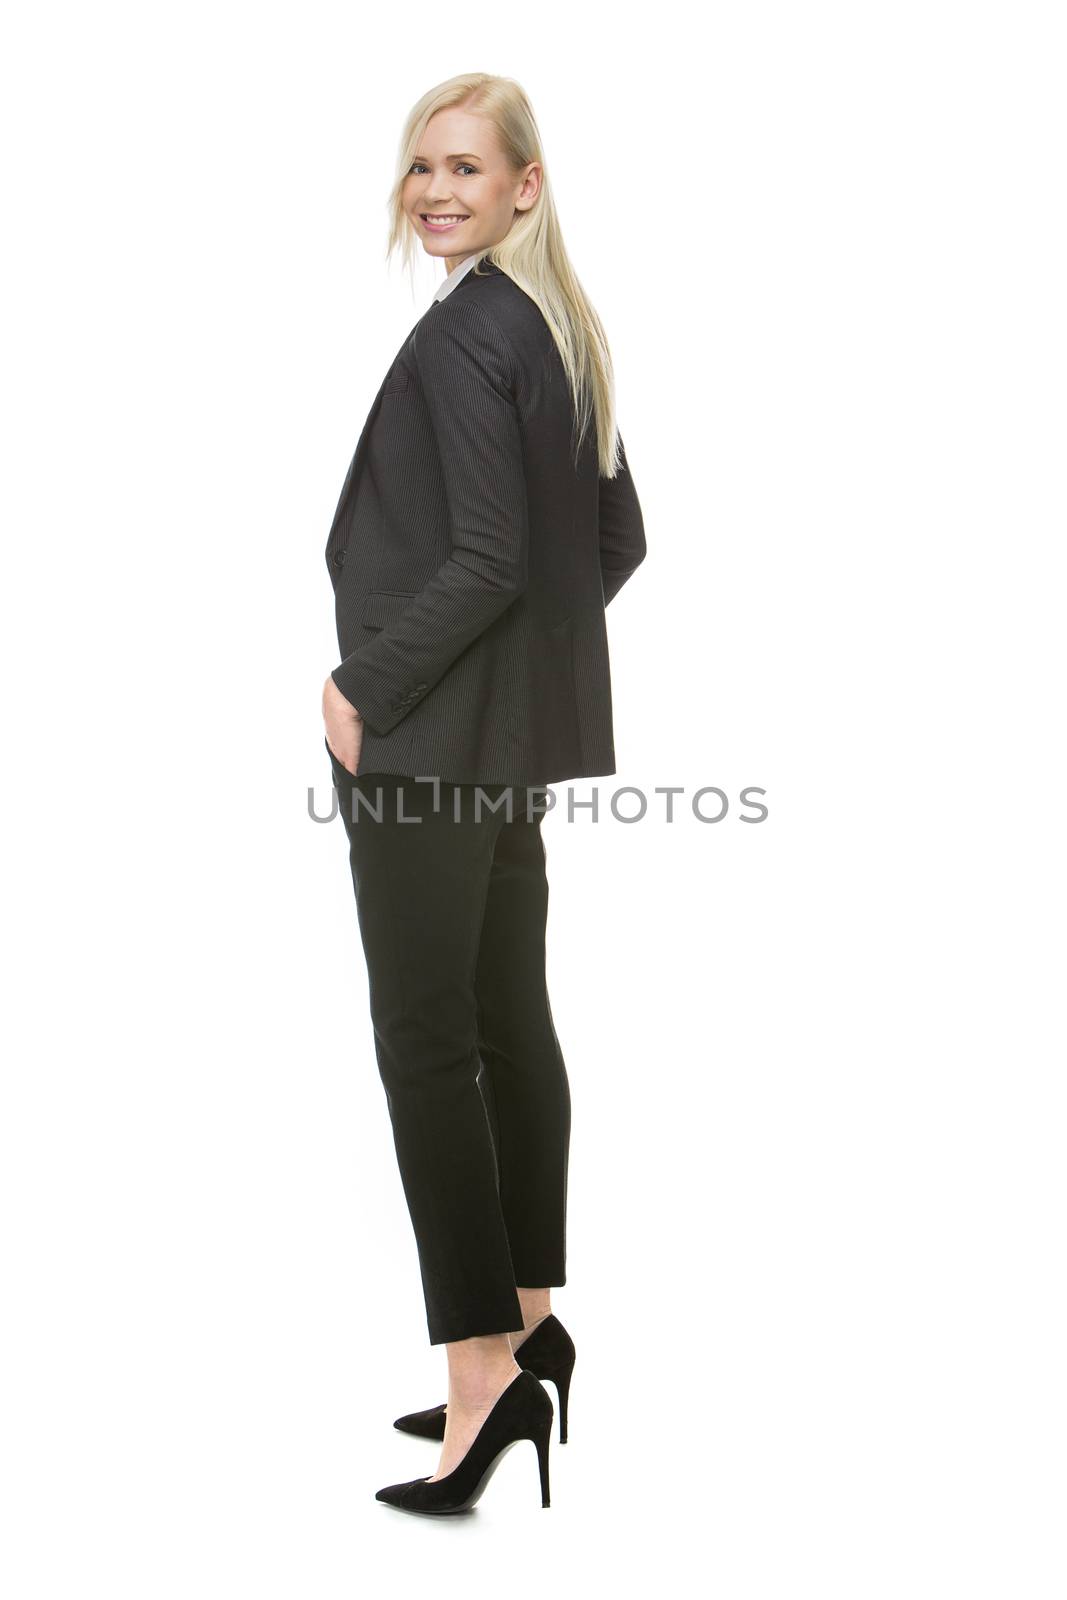 businesswoman with hands in pocket by Flareimage